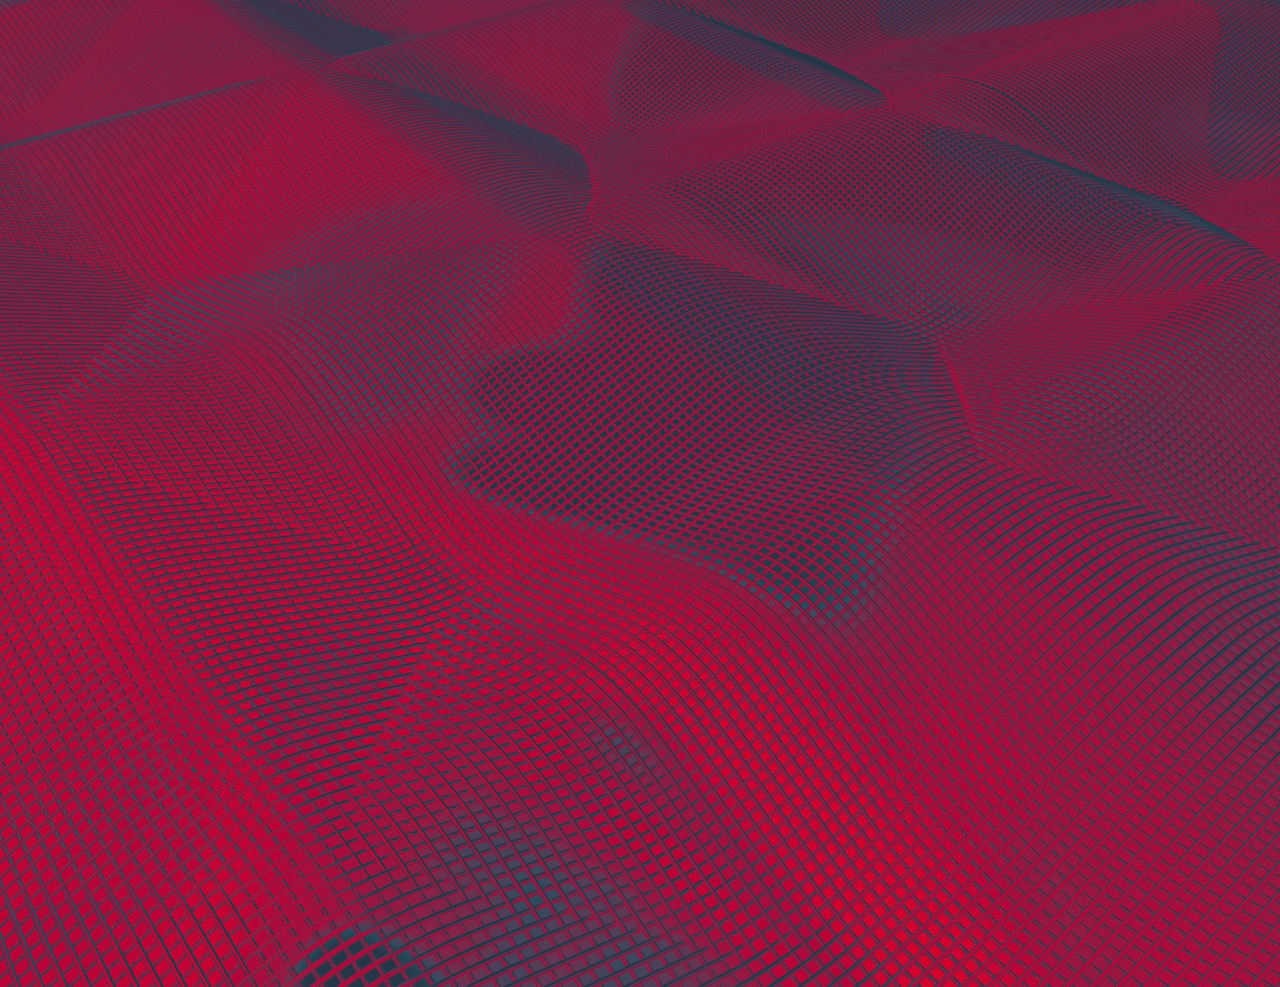 Background of a textured metal sheet - red texture